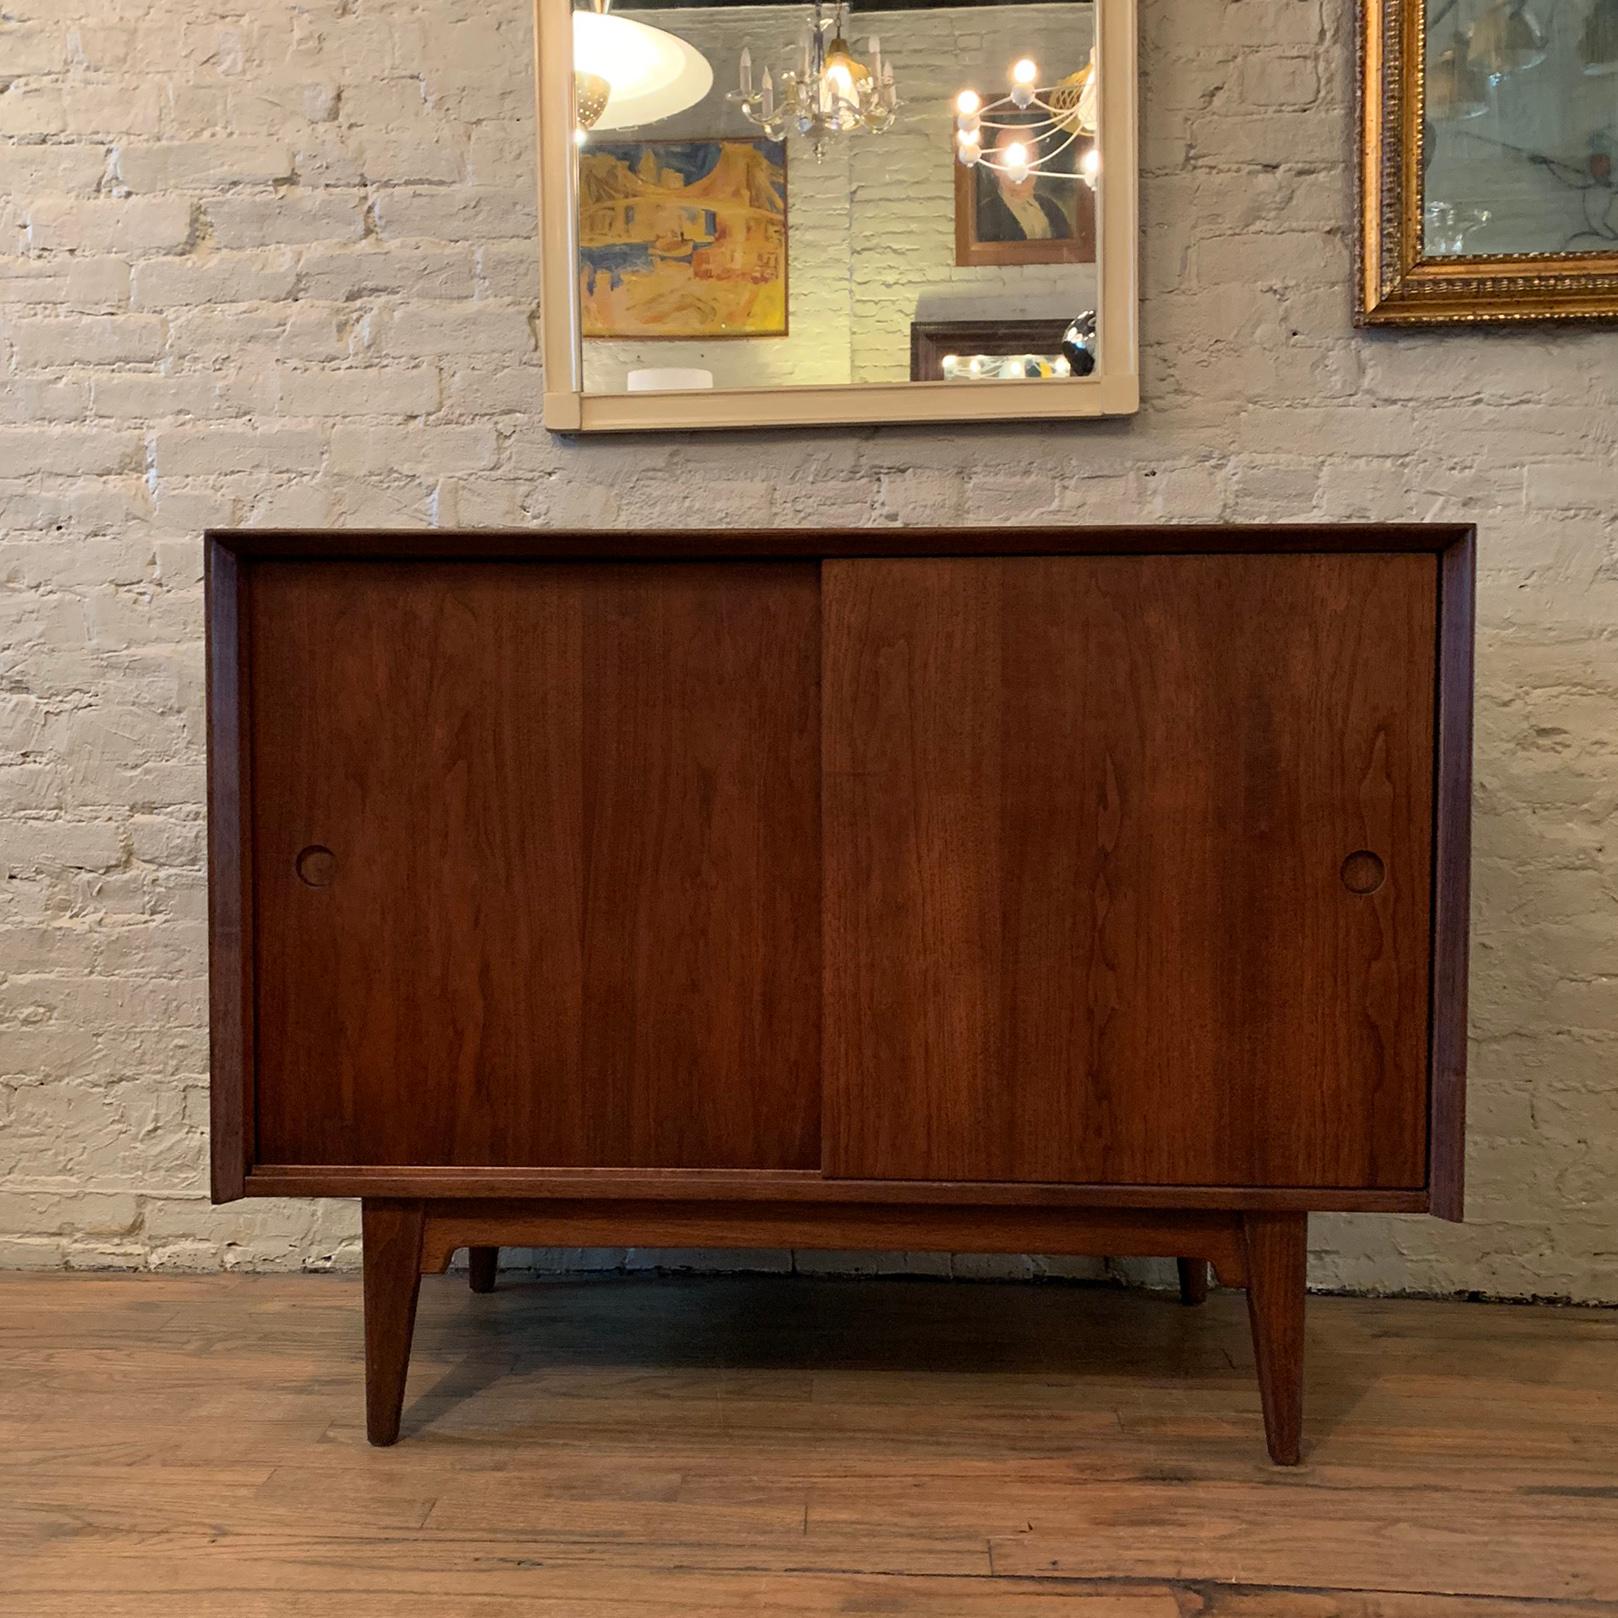 Elegant and minimal, Mid-Century Modern, walnut, credenza or sideboard cabinet by Jens Risom features recessed pulls on sliding doors with 2 interior shelves.